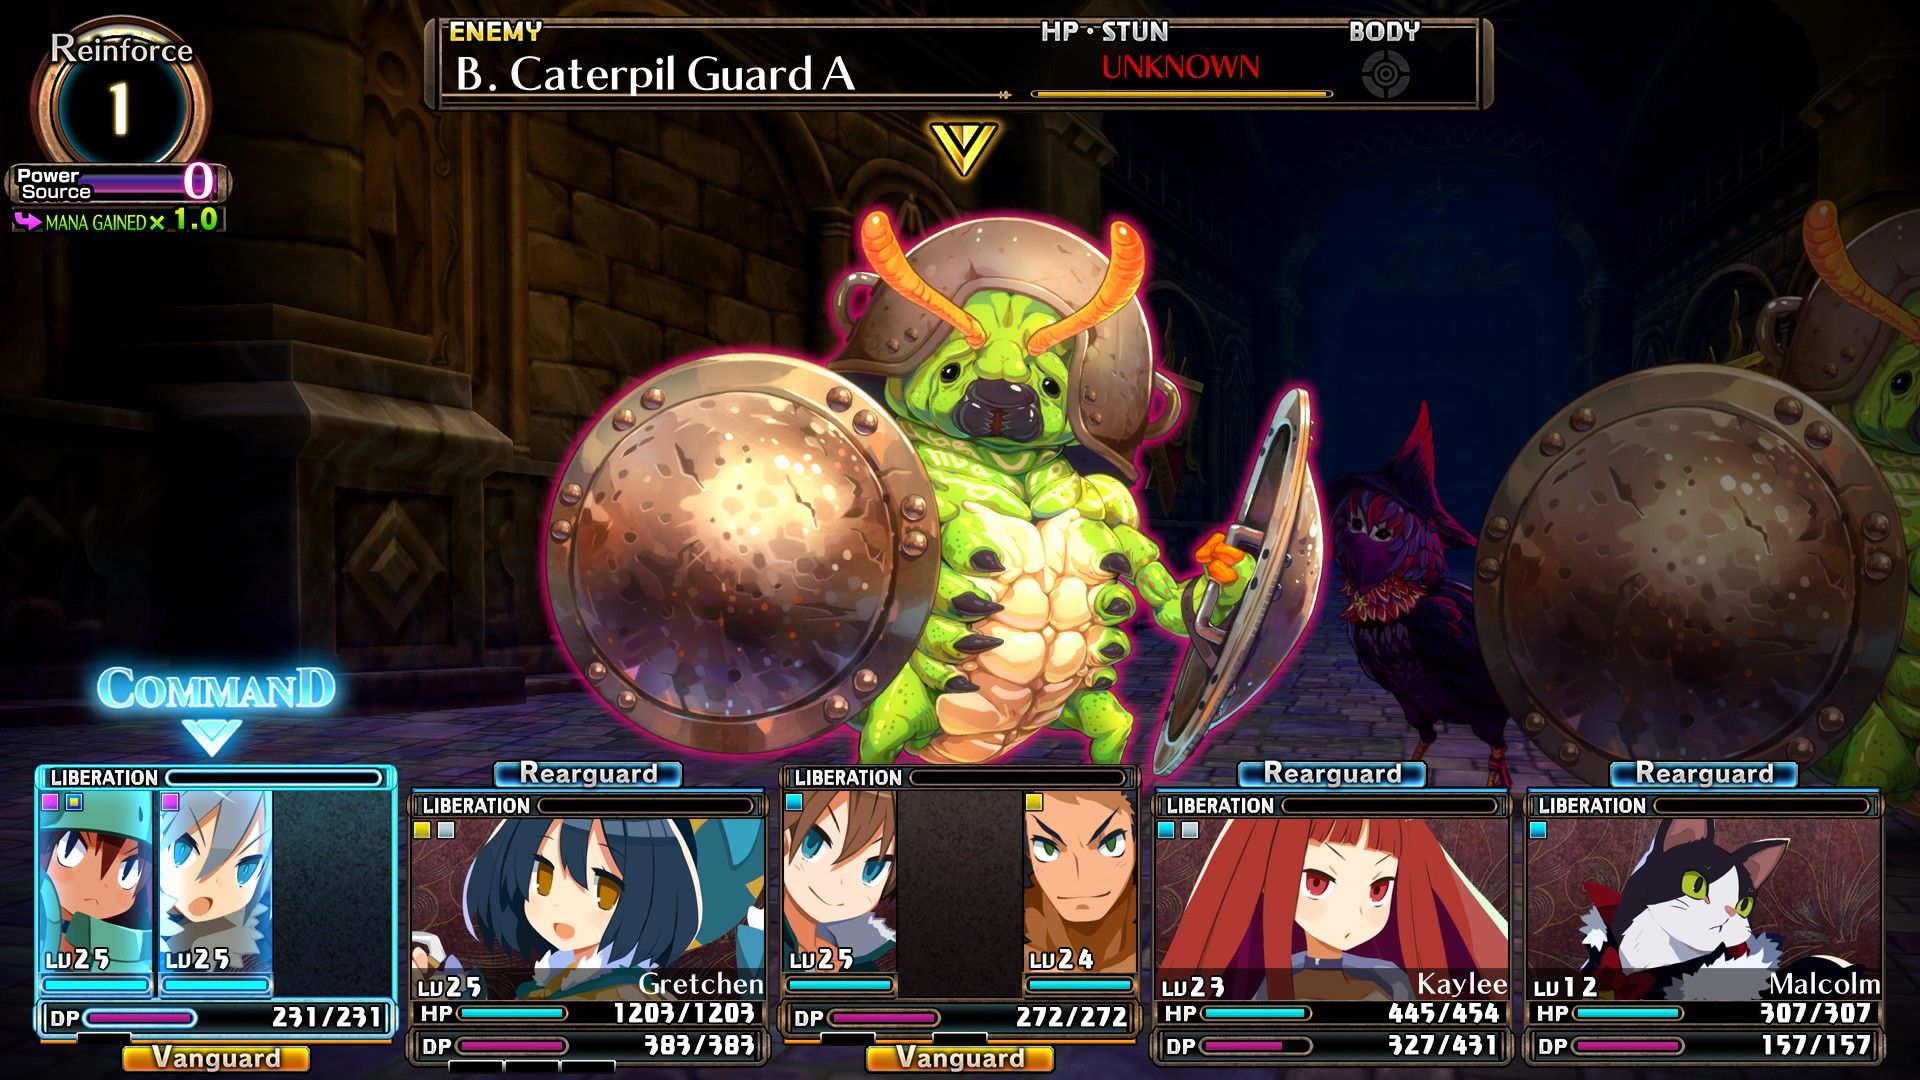 The player fights against a Caterpil Guard boss with their team in Labyrinth Of Galleria: The Moon Society.